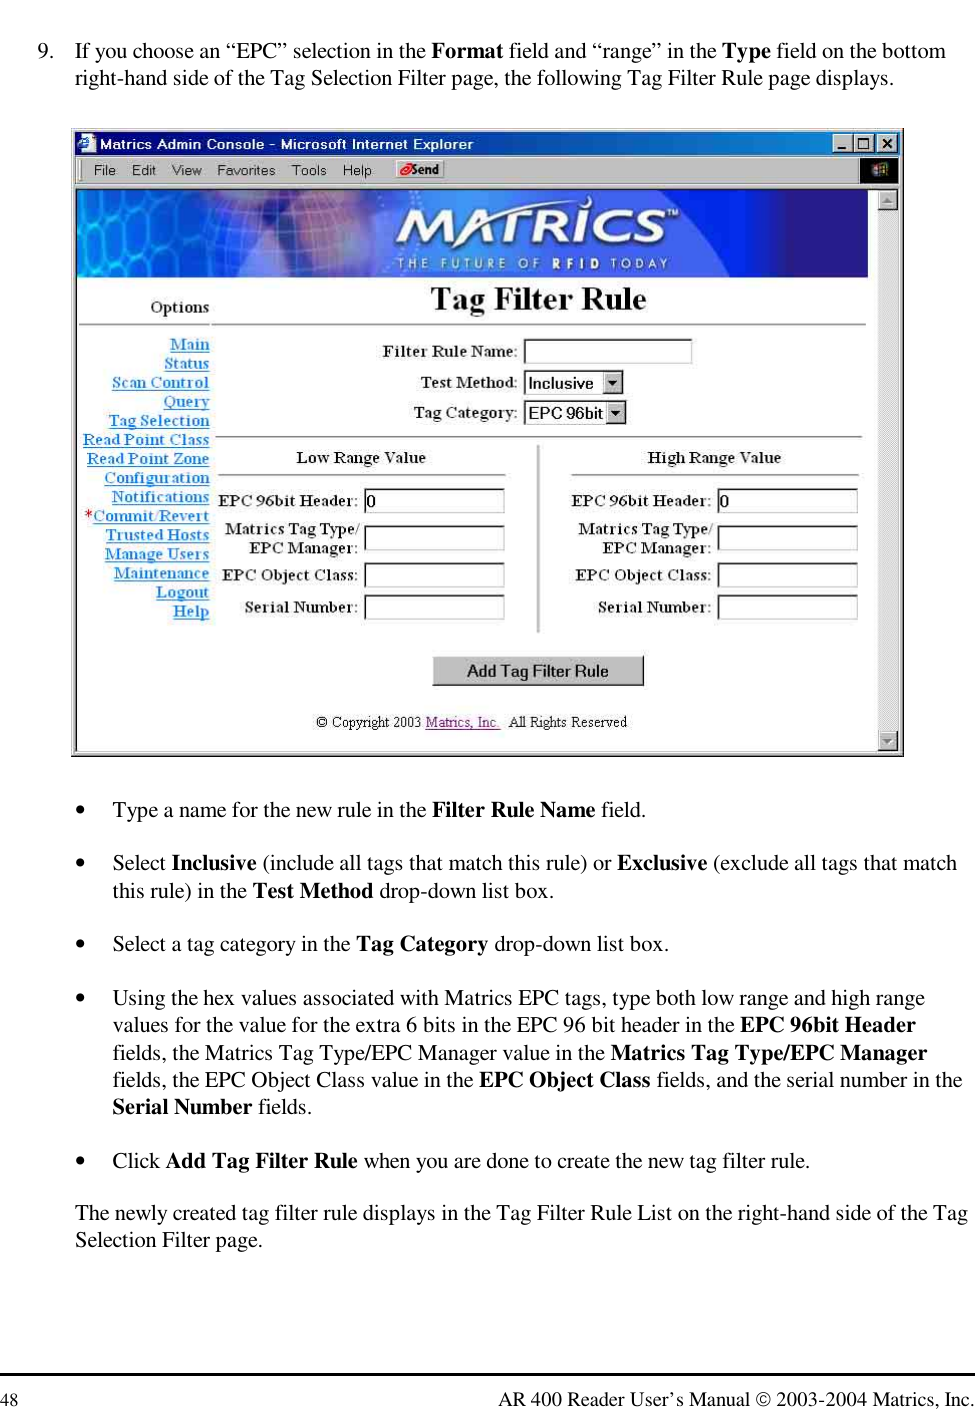  48  AR 400 Reader User’s Manual  2003-2004 Matrics, Inc. 9.  If you choose an “EPC” selection in the Format field and “range” in the Type field on the bottom right-hand side of the Tag Selection Filter page, the following Tag Filter Rule page displays.  •  Type a name for the new rule in the Filter Rule Name field. •  Select Inclusive (include all tags that match this rule) or Exclusive (exclude all tags that match this rule) in the Test Method drop-down list box.  •  Select a tag category in the Tag Category drop-down list box.  •  Using the hex values associated with Matrics EPC tags, type both low range and high range values for the value for the extra 6 bits in the EPC 96 bit header in the EPC 96bit Header fields, the Matrics Tag Type/EPC Manager value in the Matrics Tag Type/EPC Manager fields, the EPC Object Class value in the EPC Object Class fields, and the serial number in the Serial Number fields. •  Click Add Tag Filter Rule when you are done to create the new tag filter rule. The newly created tag filter rule displays in the Tag Filter Rule List on the right-hand side of the Tag Selection Filter page.  